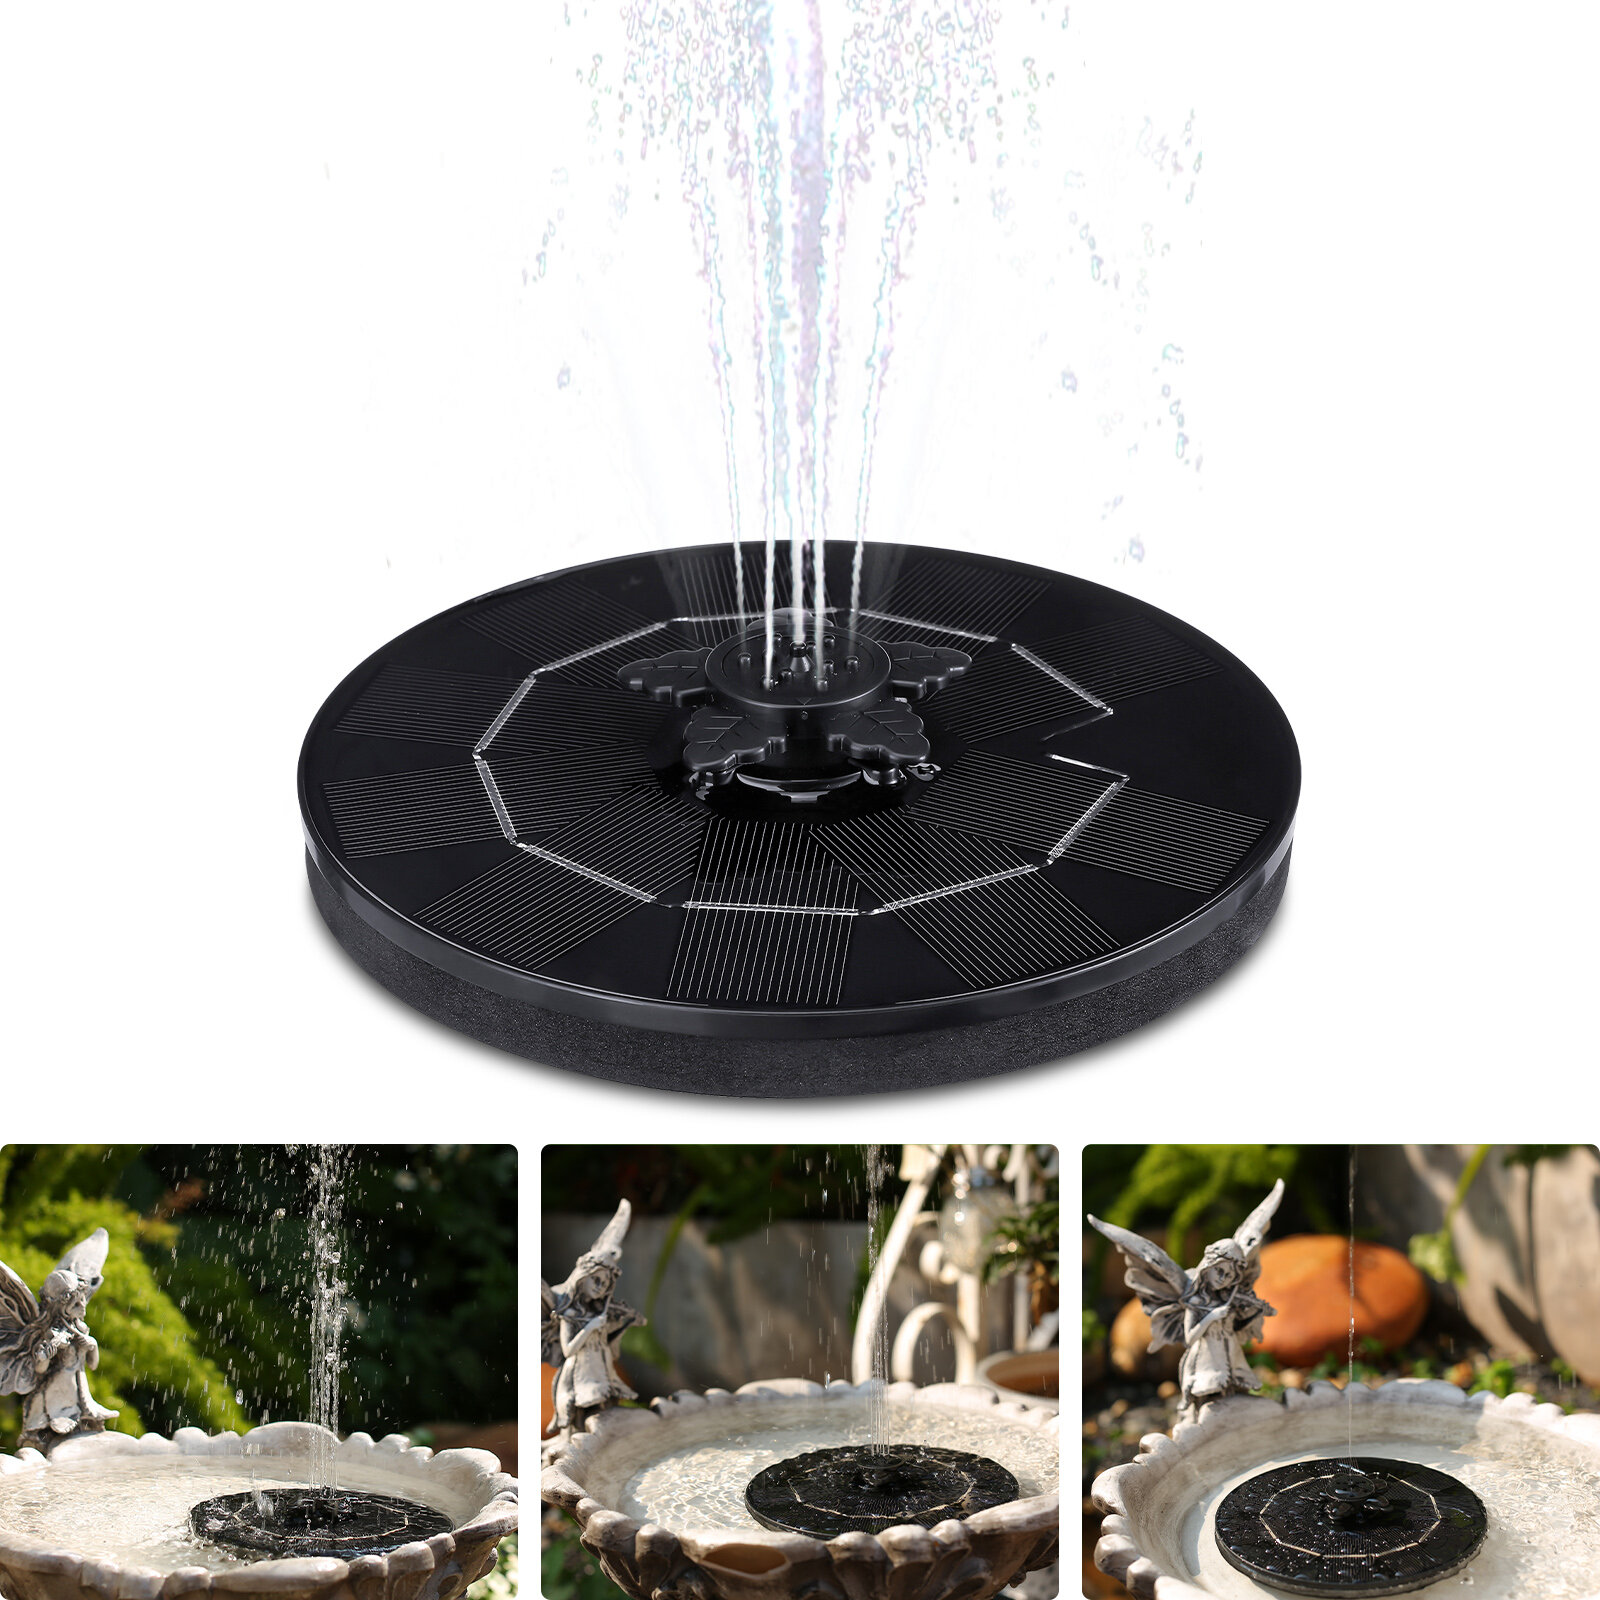 

16cm 5V/3W Solar Powered Fountain Pool Petal Adjustable 3 Gear Switching Fountain Floating Water Nozzle Garden Decoratio